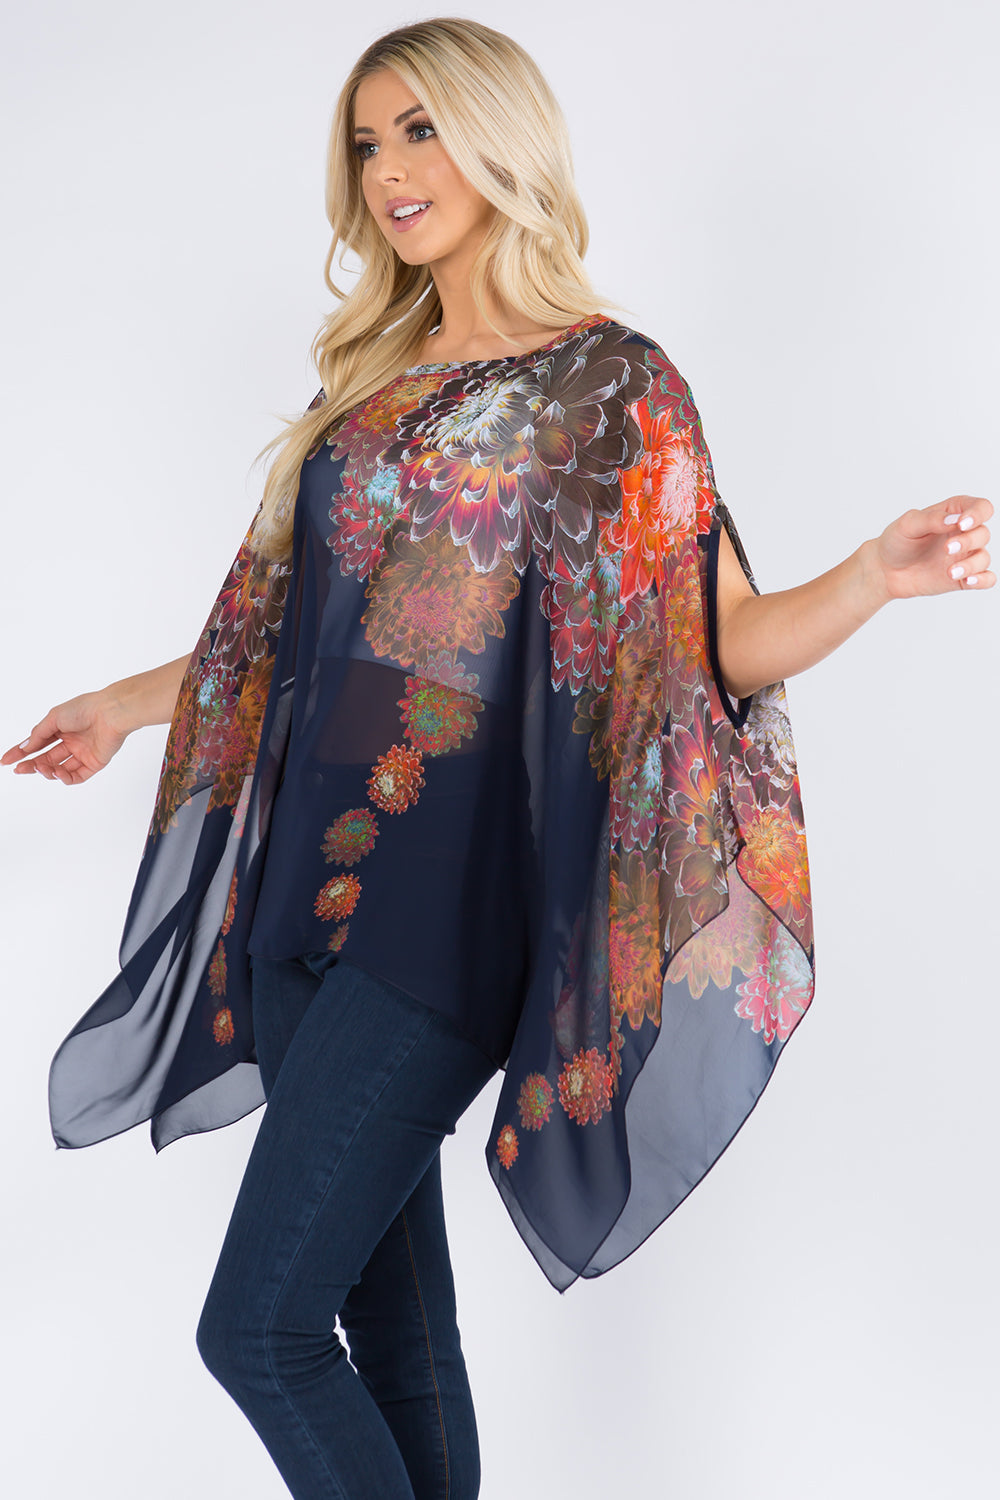 PP-3103 big floral poncho with arm hole